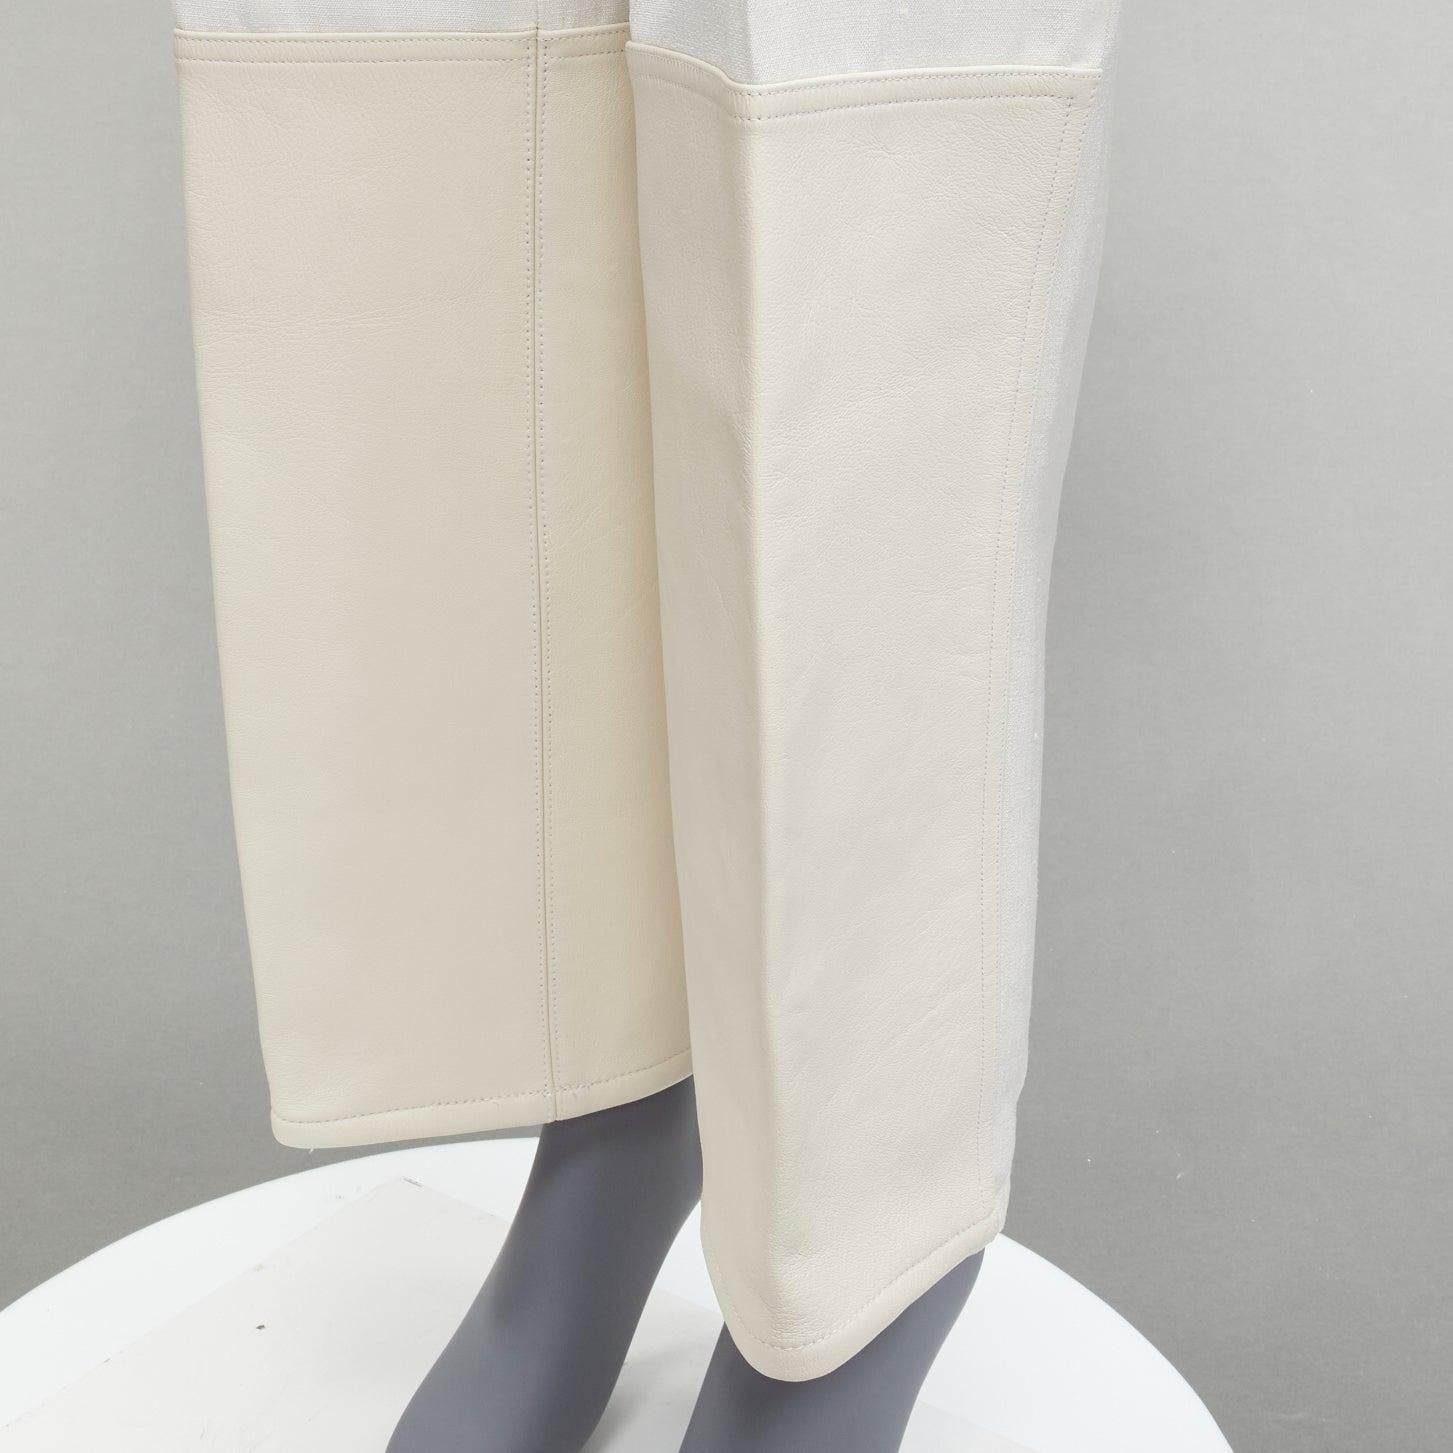 OLD CELINE Phoebe Philo white leather hem minimal straight leg pants FR36 S
Reference: LNKO/A02156
Brand: Celine
Designer: Phoebe Philo
Material: Viscose, Silk
Color: White, Off White
Pattern: Solid
Closure: Zip Fly
Lining: White Fabric
Extra